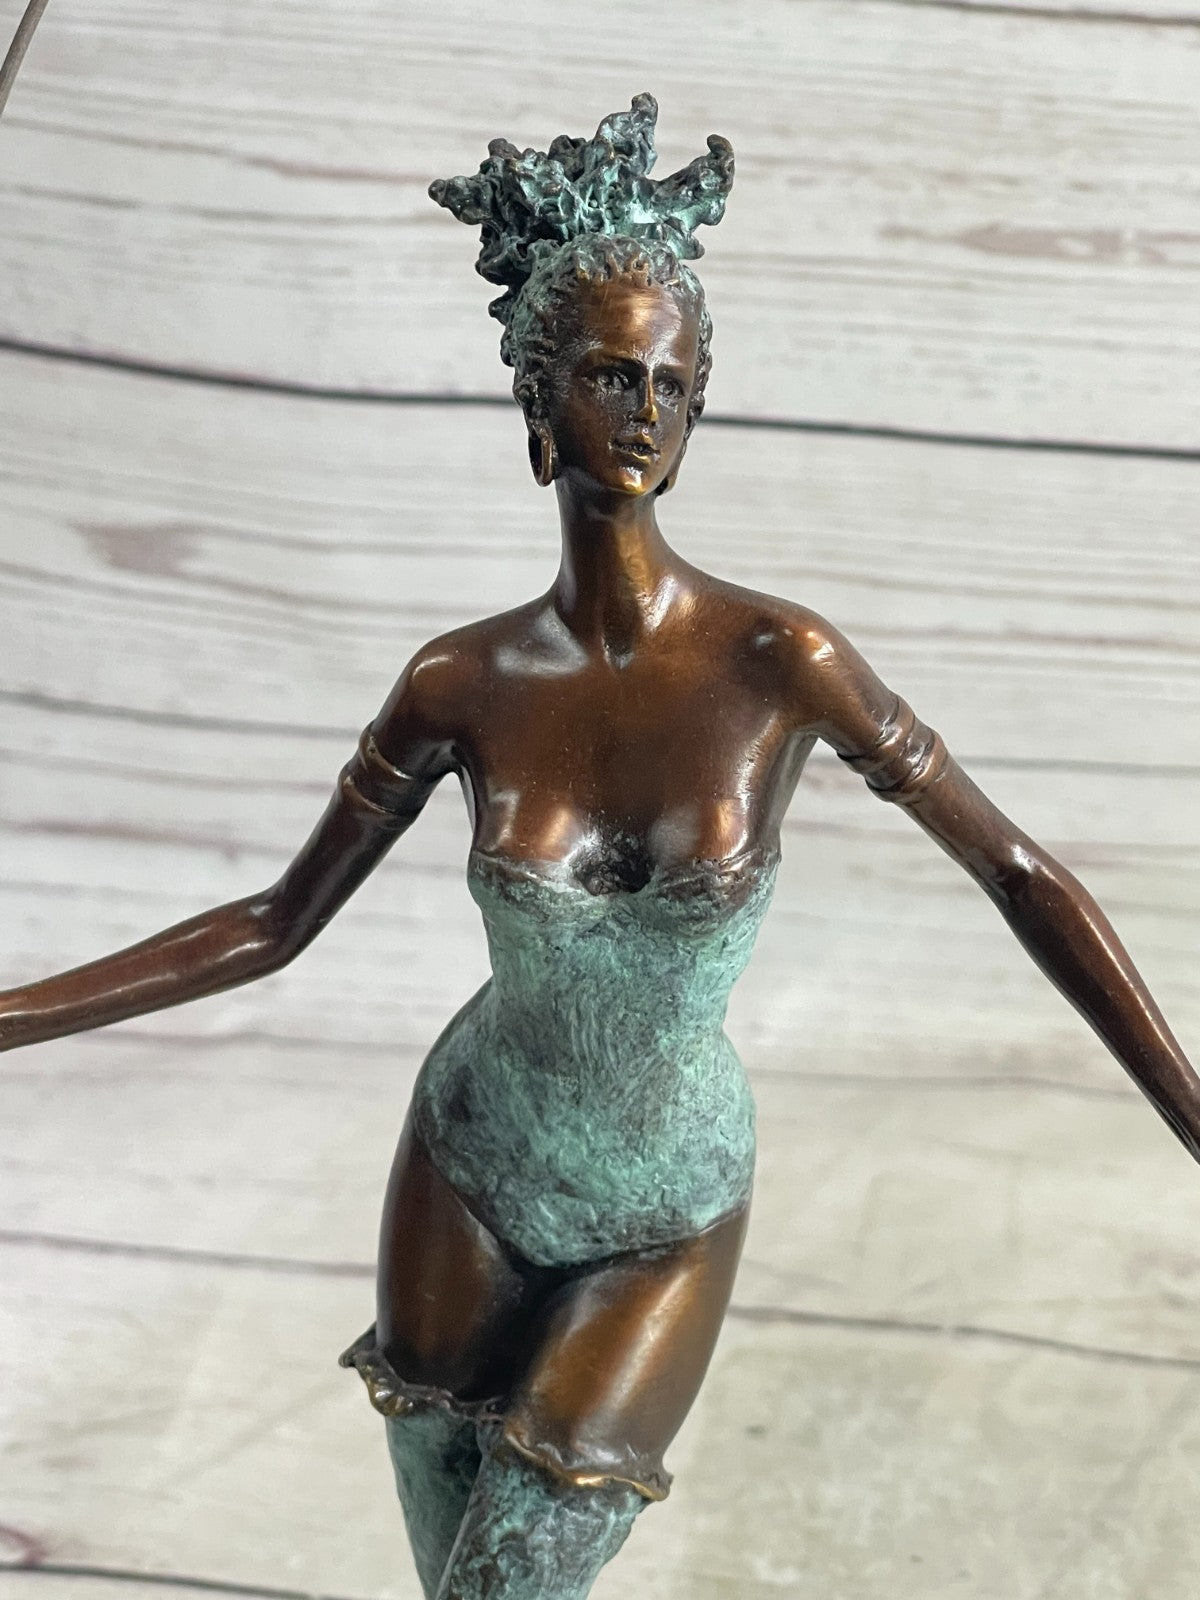 Handmade Bronze Figure: Graceful Woman Dancer with Special Patina by Milo